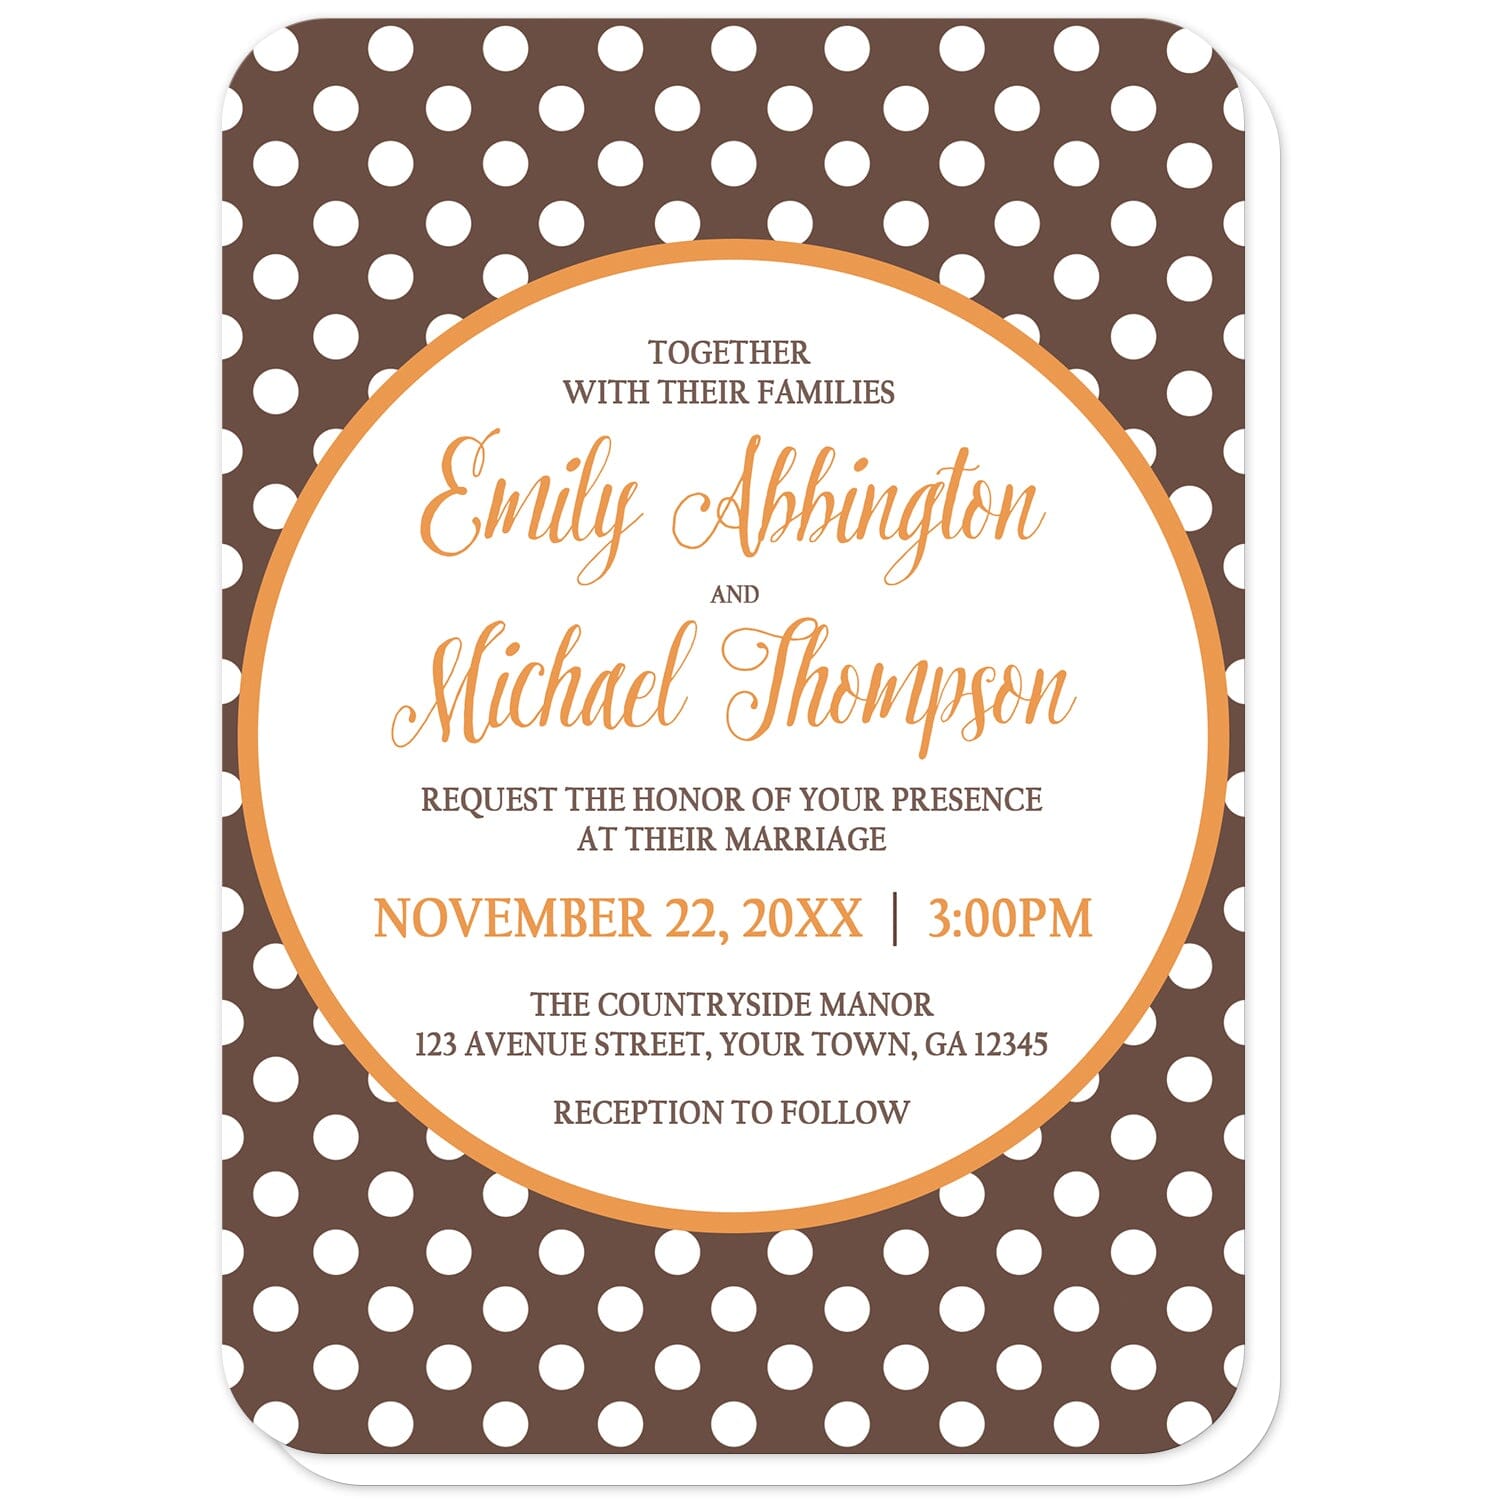 Orange Brown Polka Dot Wedding Invitations (with rounded corners) at Artistically Invited. Autumn-inspired orange brown polka dot wedding invitations with your marriage celebration details custom printed in orange and brown inside a white circle outlined in orange, over a brown polka dot pattern. The couple's names and wedding date are printed in orange while the remaining details are printed in brown.